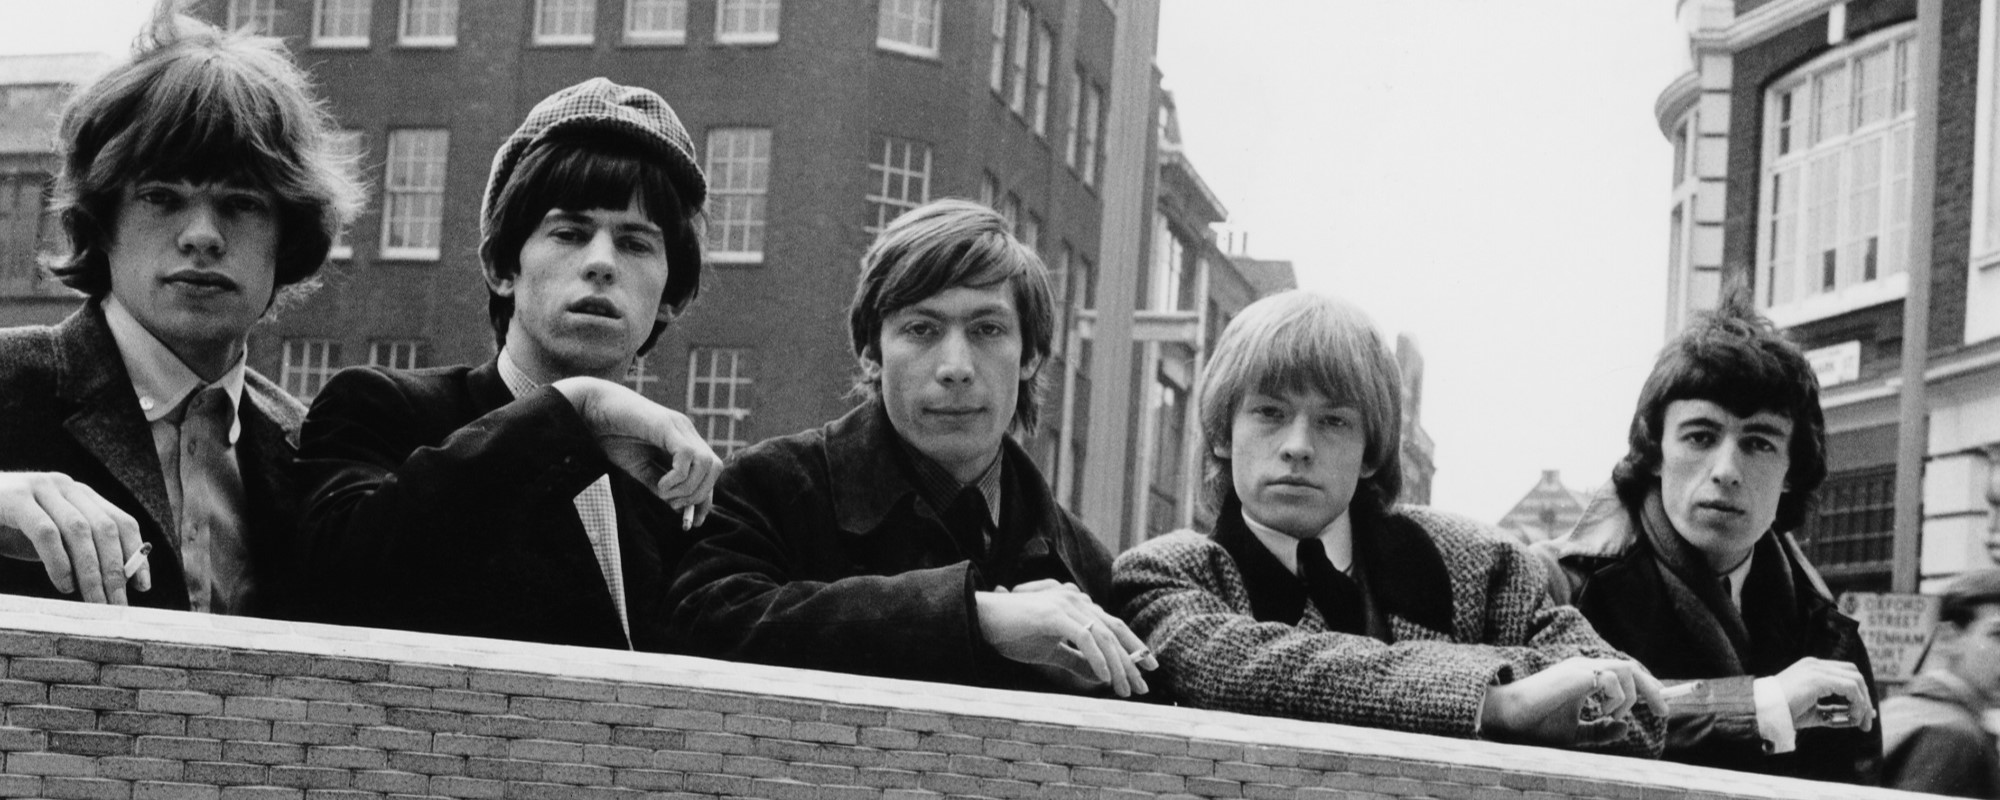 Start Us Up: The Rolling Stones’ Debut U.S. Album Was Released 60 Years Ago